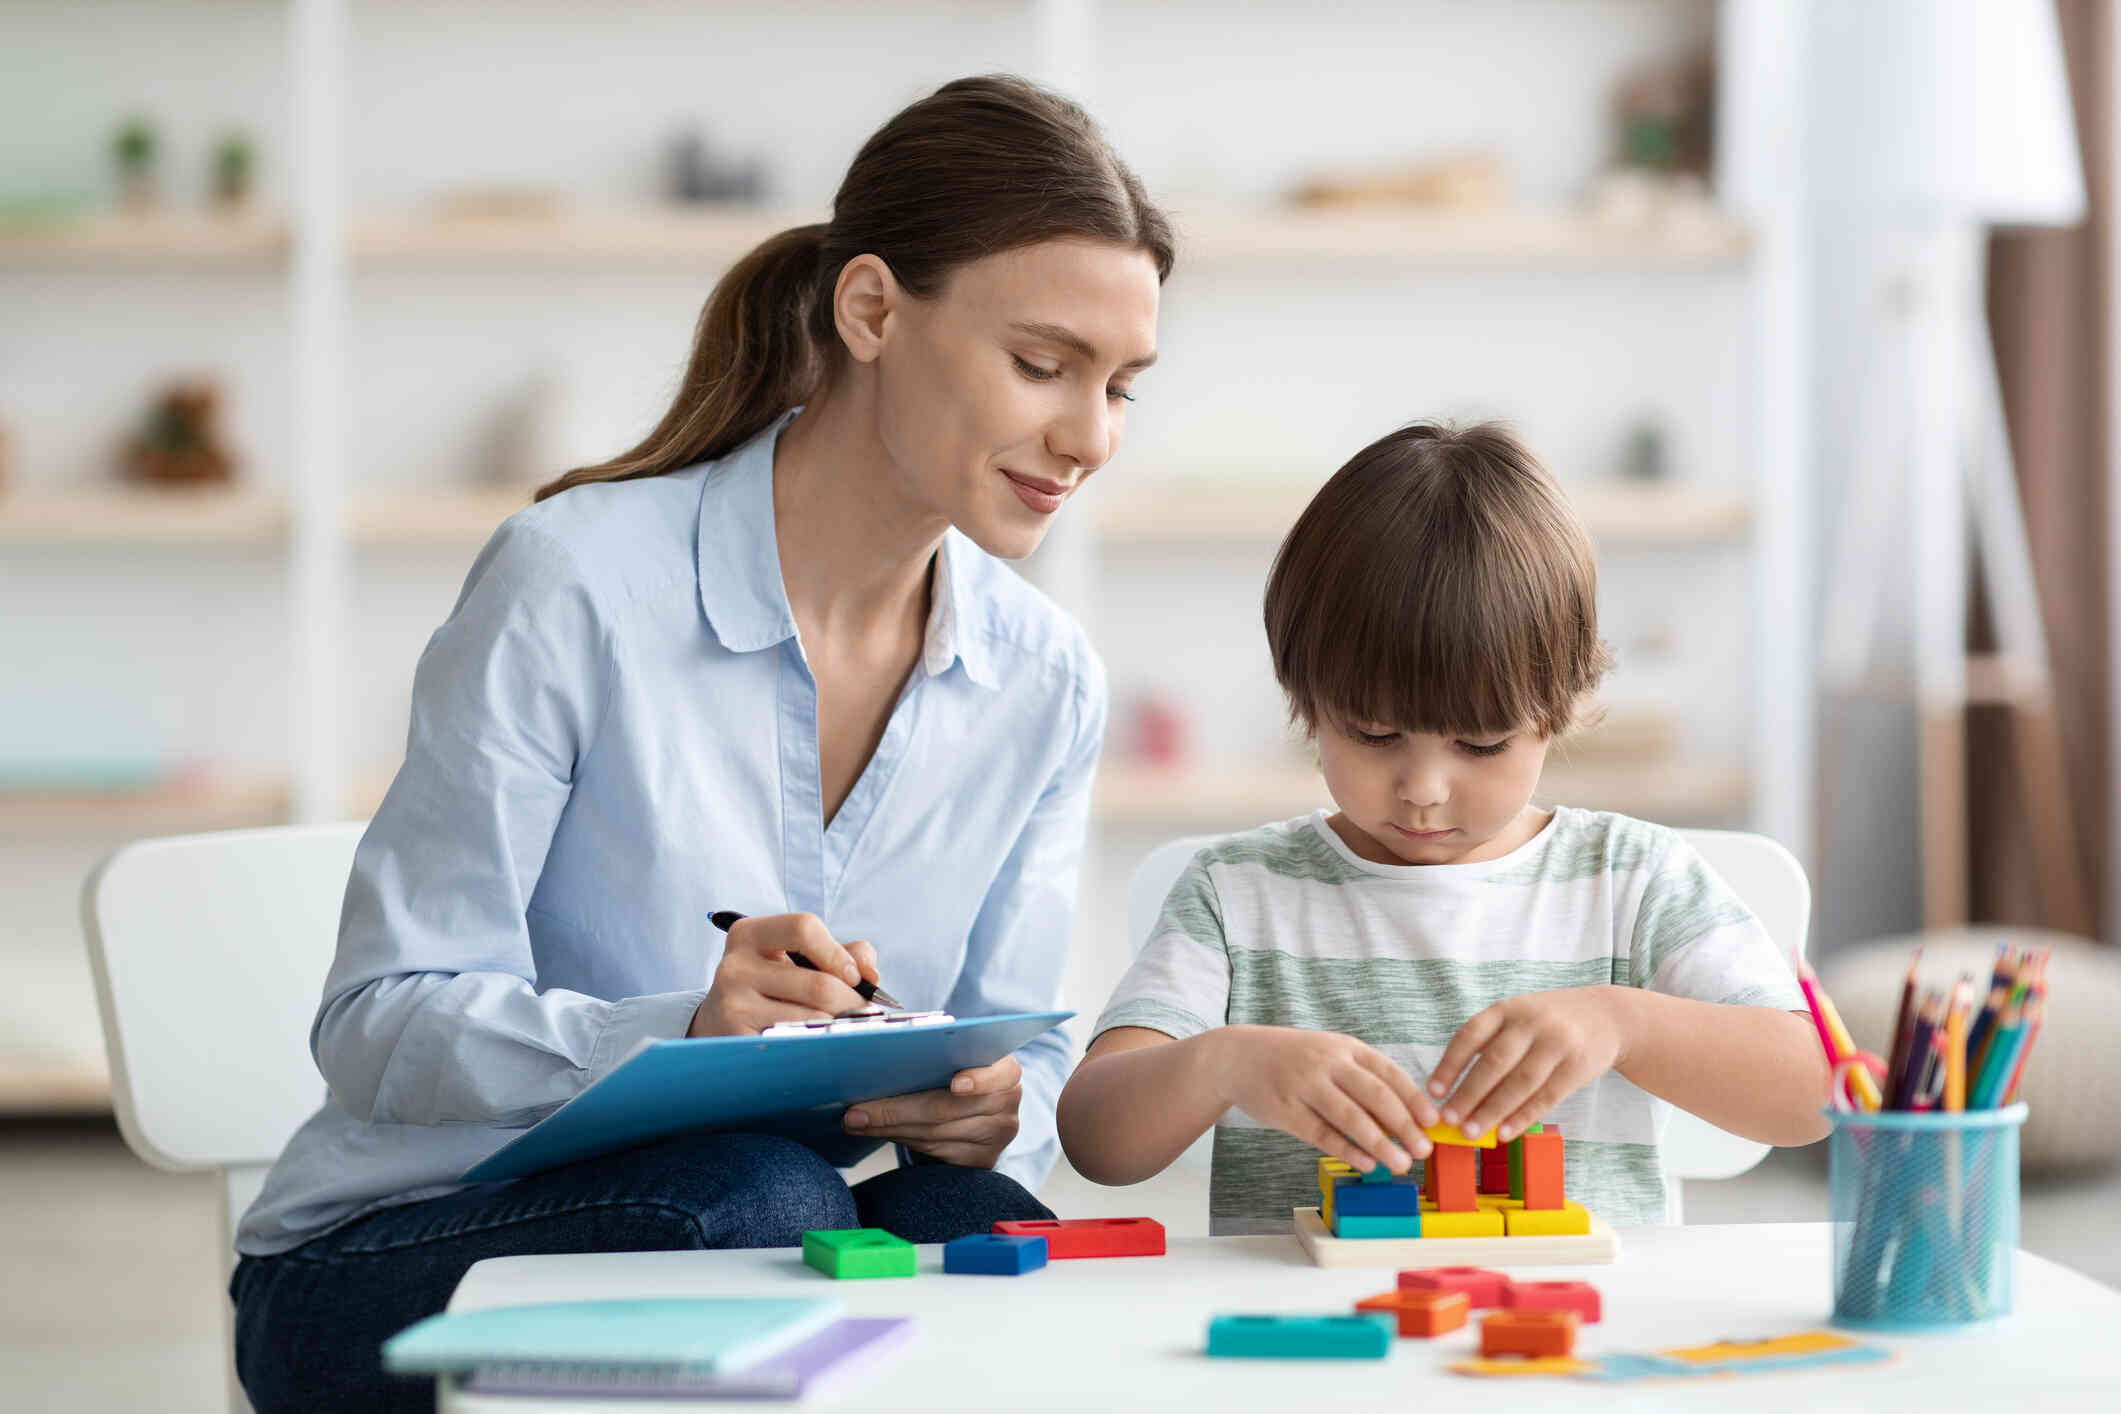 A woman with a clipboard observes a young boy playing with some blocks while smiling softly.